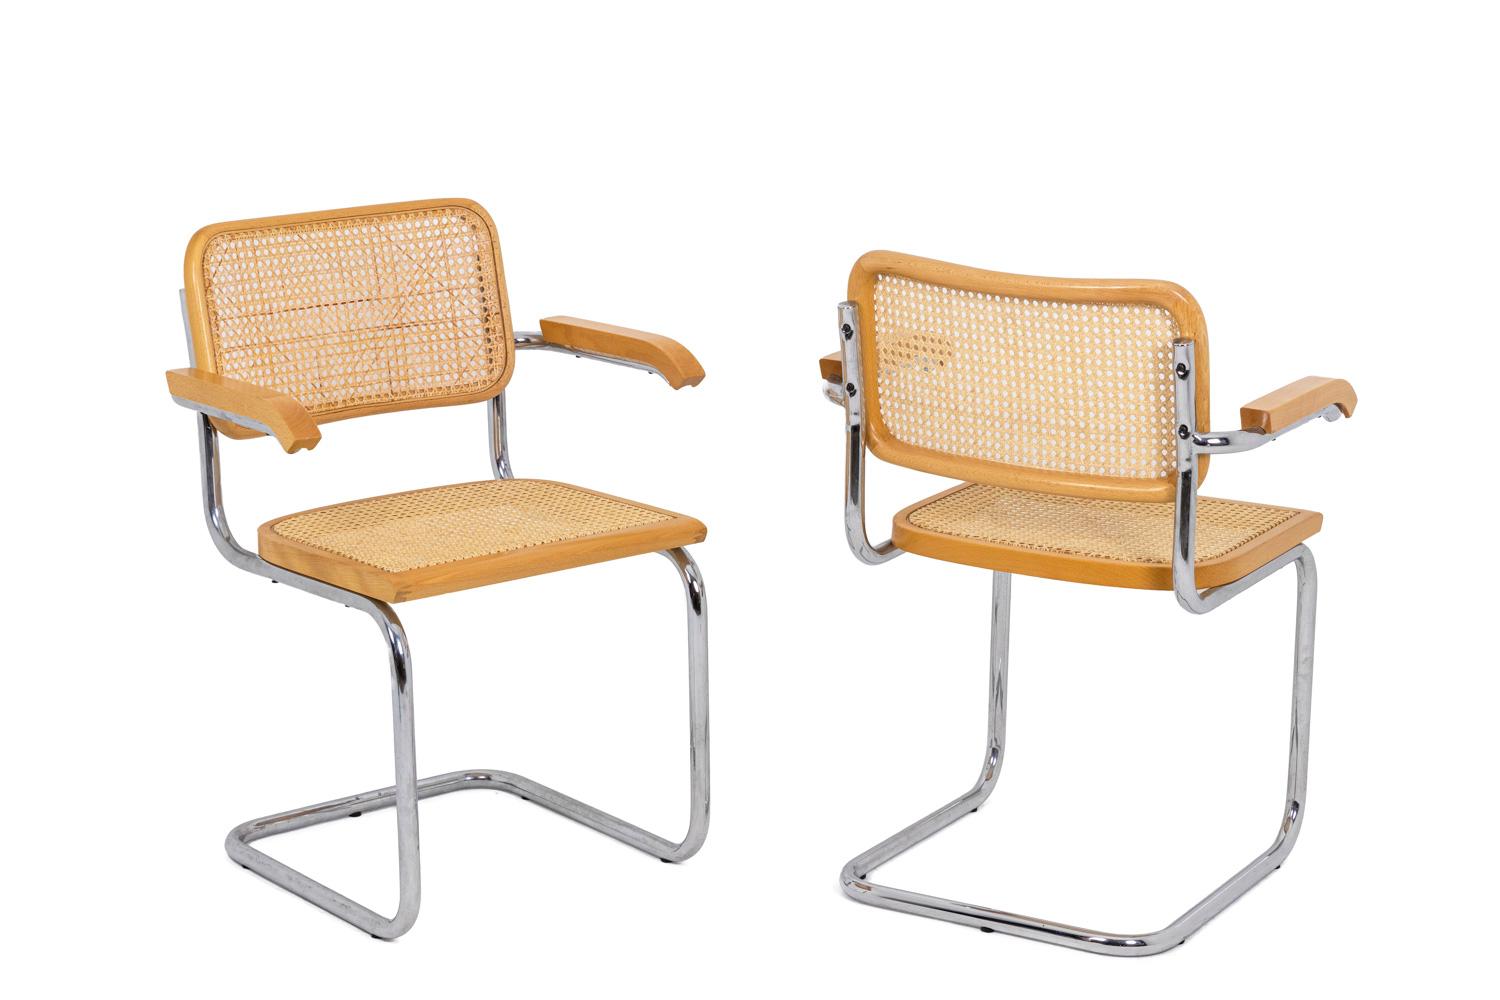 Marcel Breuer, attributed to.

Series of six armchairs in varnished blond beech. Seat and back upholstered in blond cane attached to a tubular structure of round section in chromed and folded steel. Armrests in varnished blond beech.

Italian